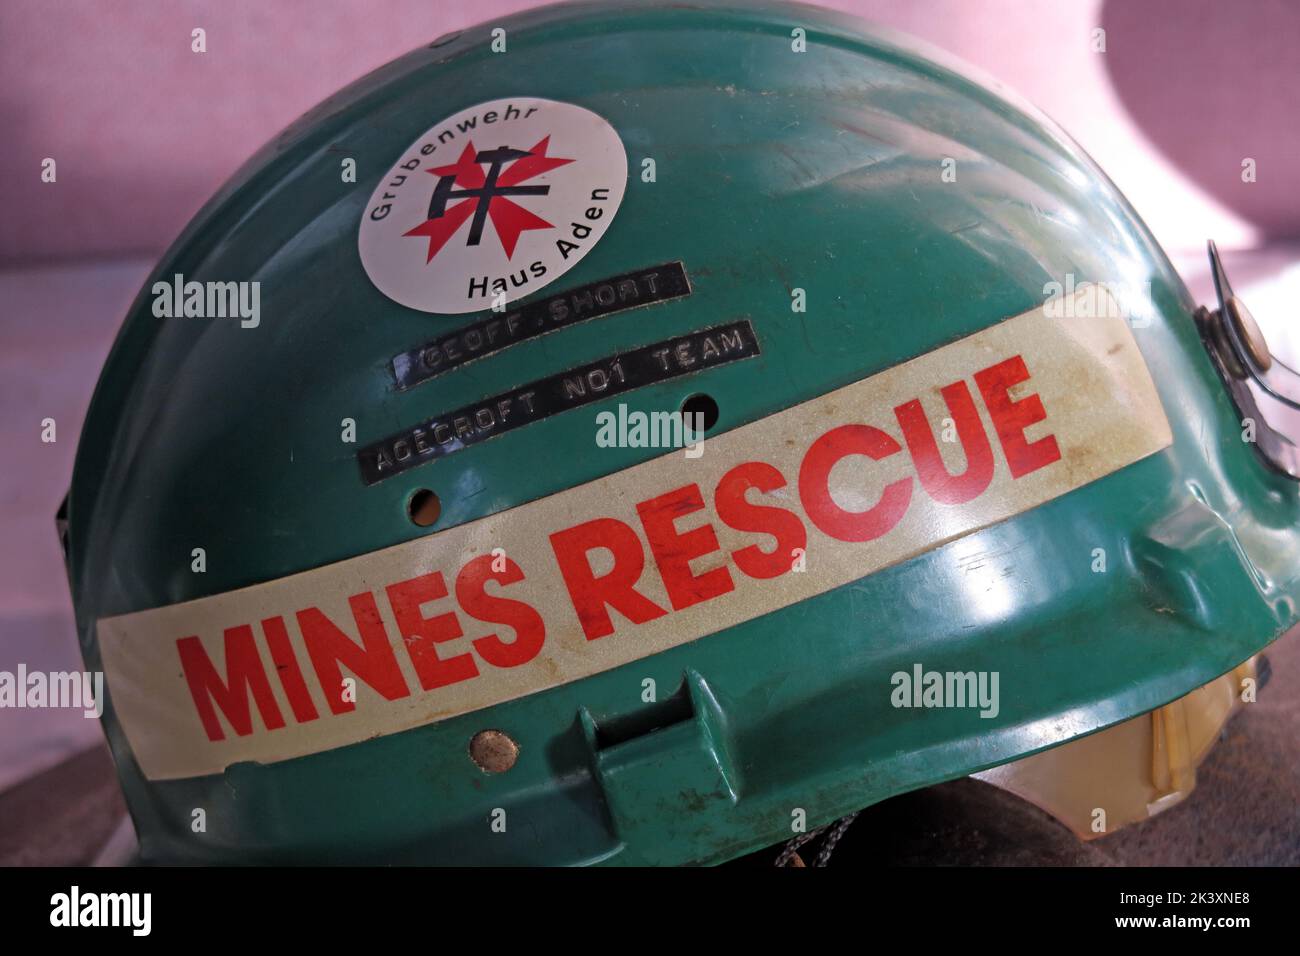 Geoff Short - Agecroft No1 team Mines Rescue helmet,coal mine, Astley Green colliery, Leigh, Greater Manchester, Lancashire, England, UK Stock Photo